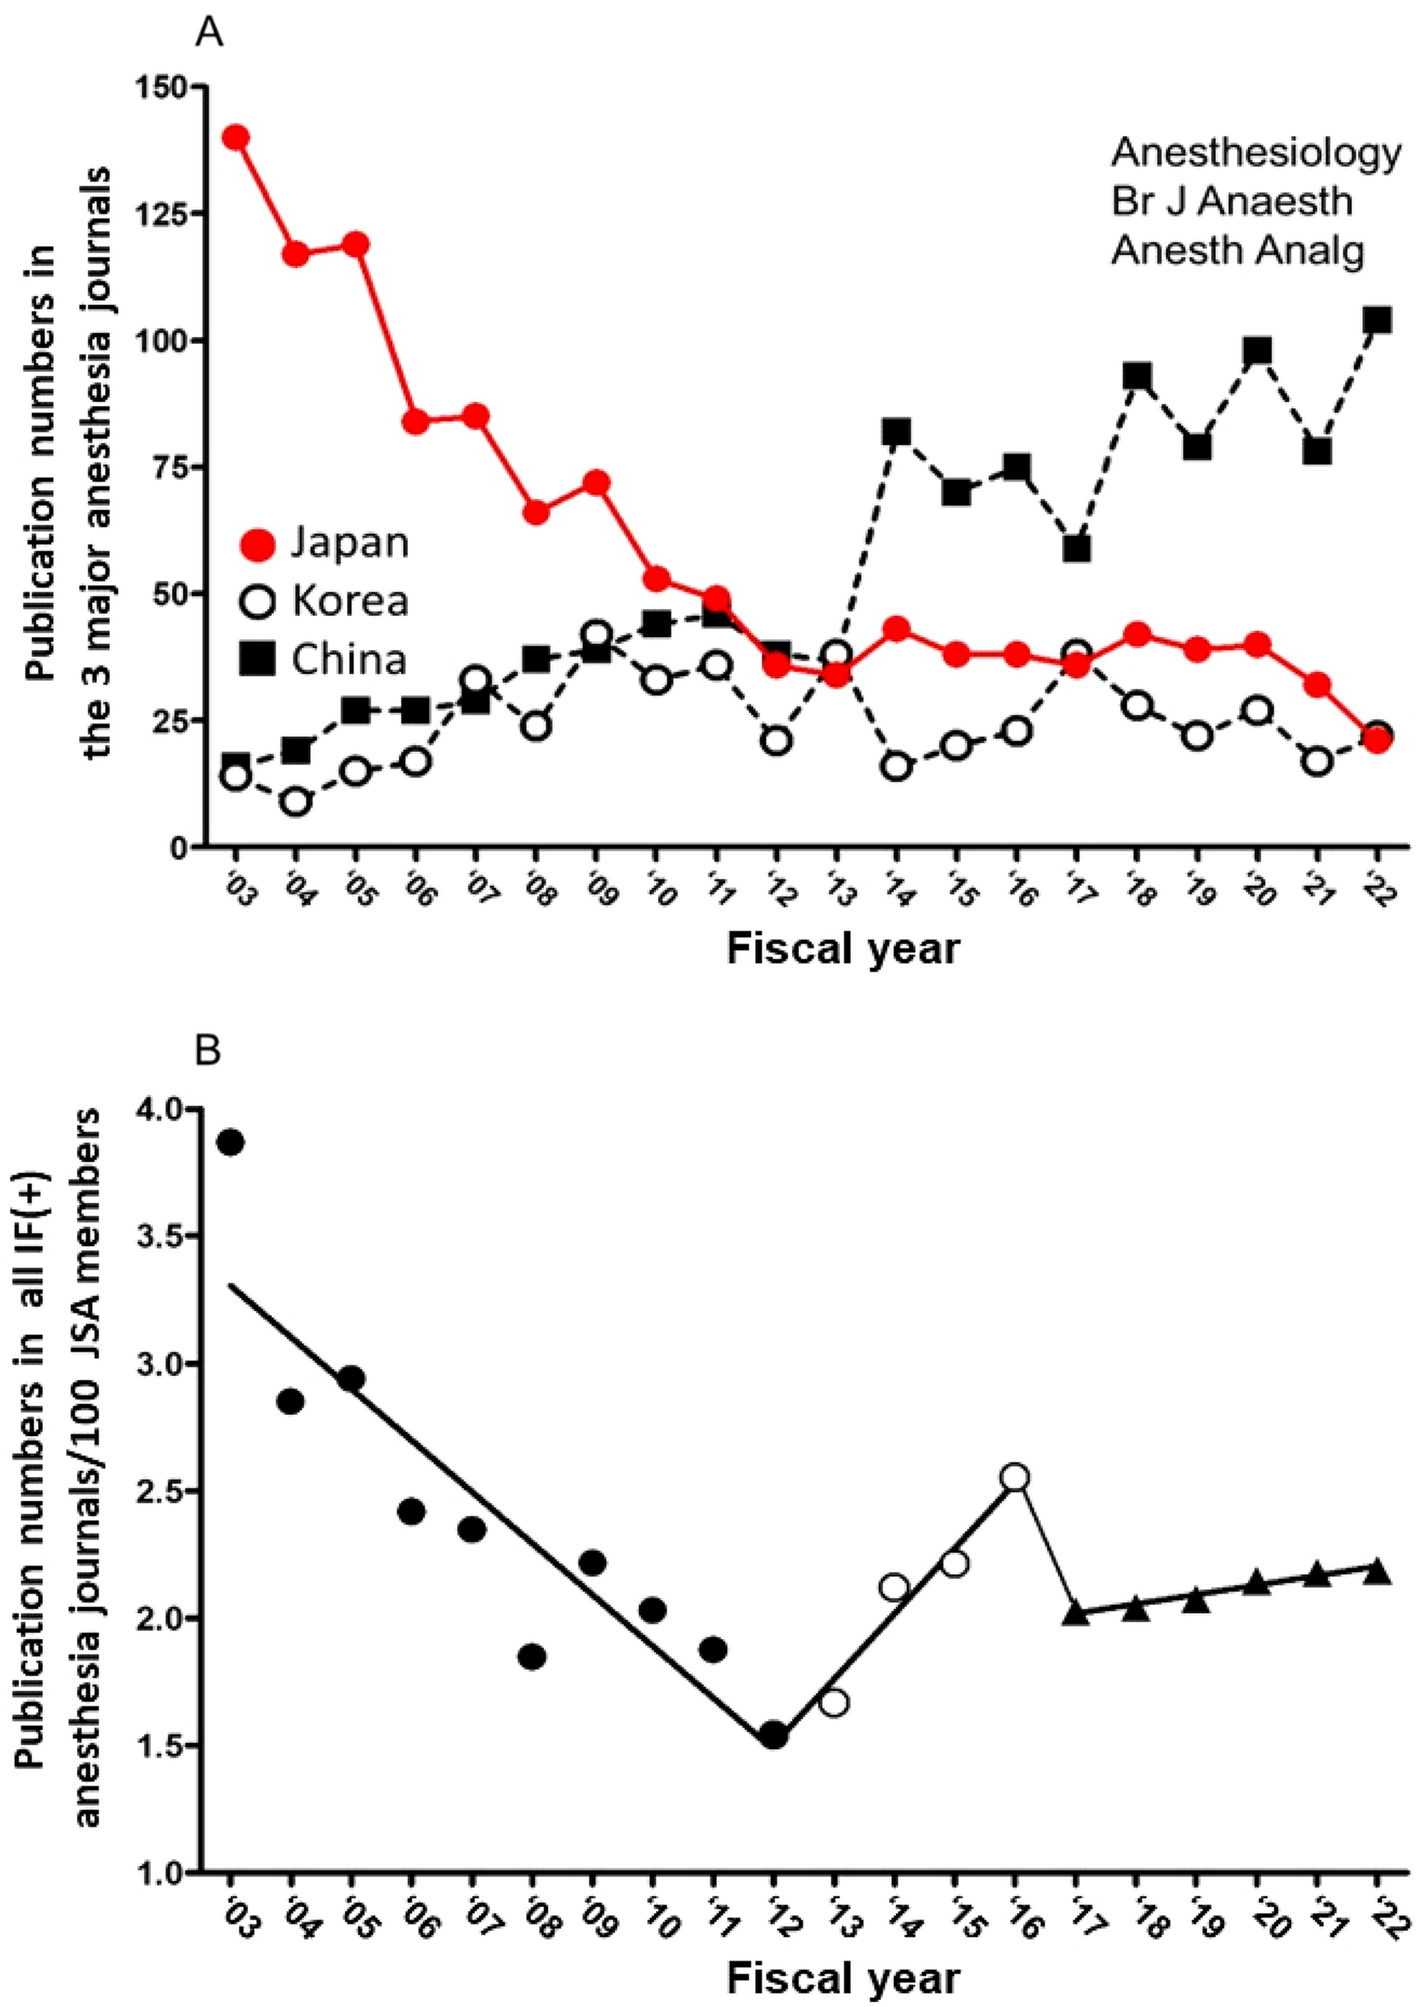 Fixing the anesthesia research crisis in Japan